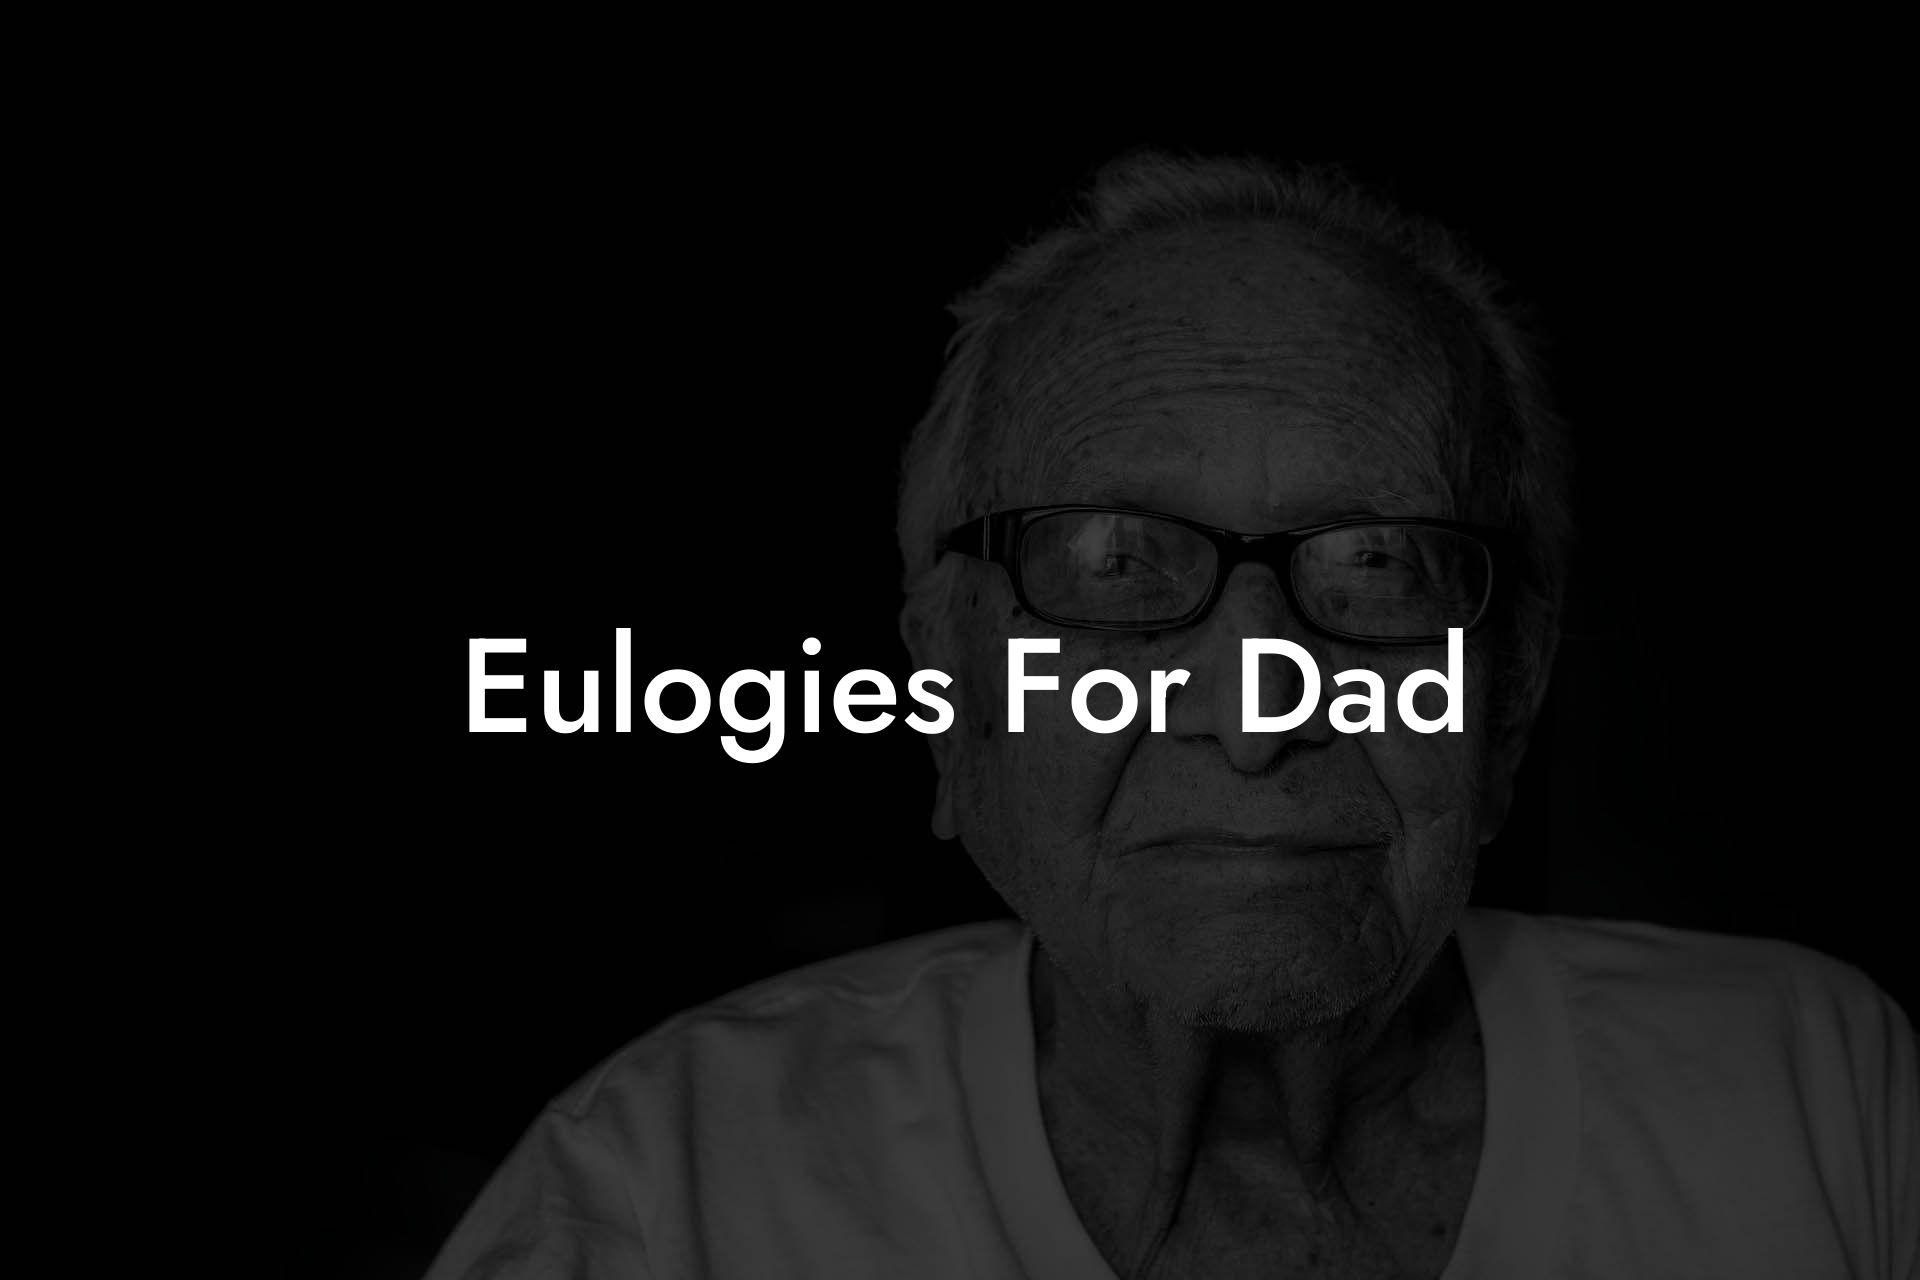 Eulogies For Dad